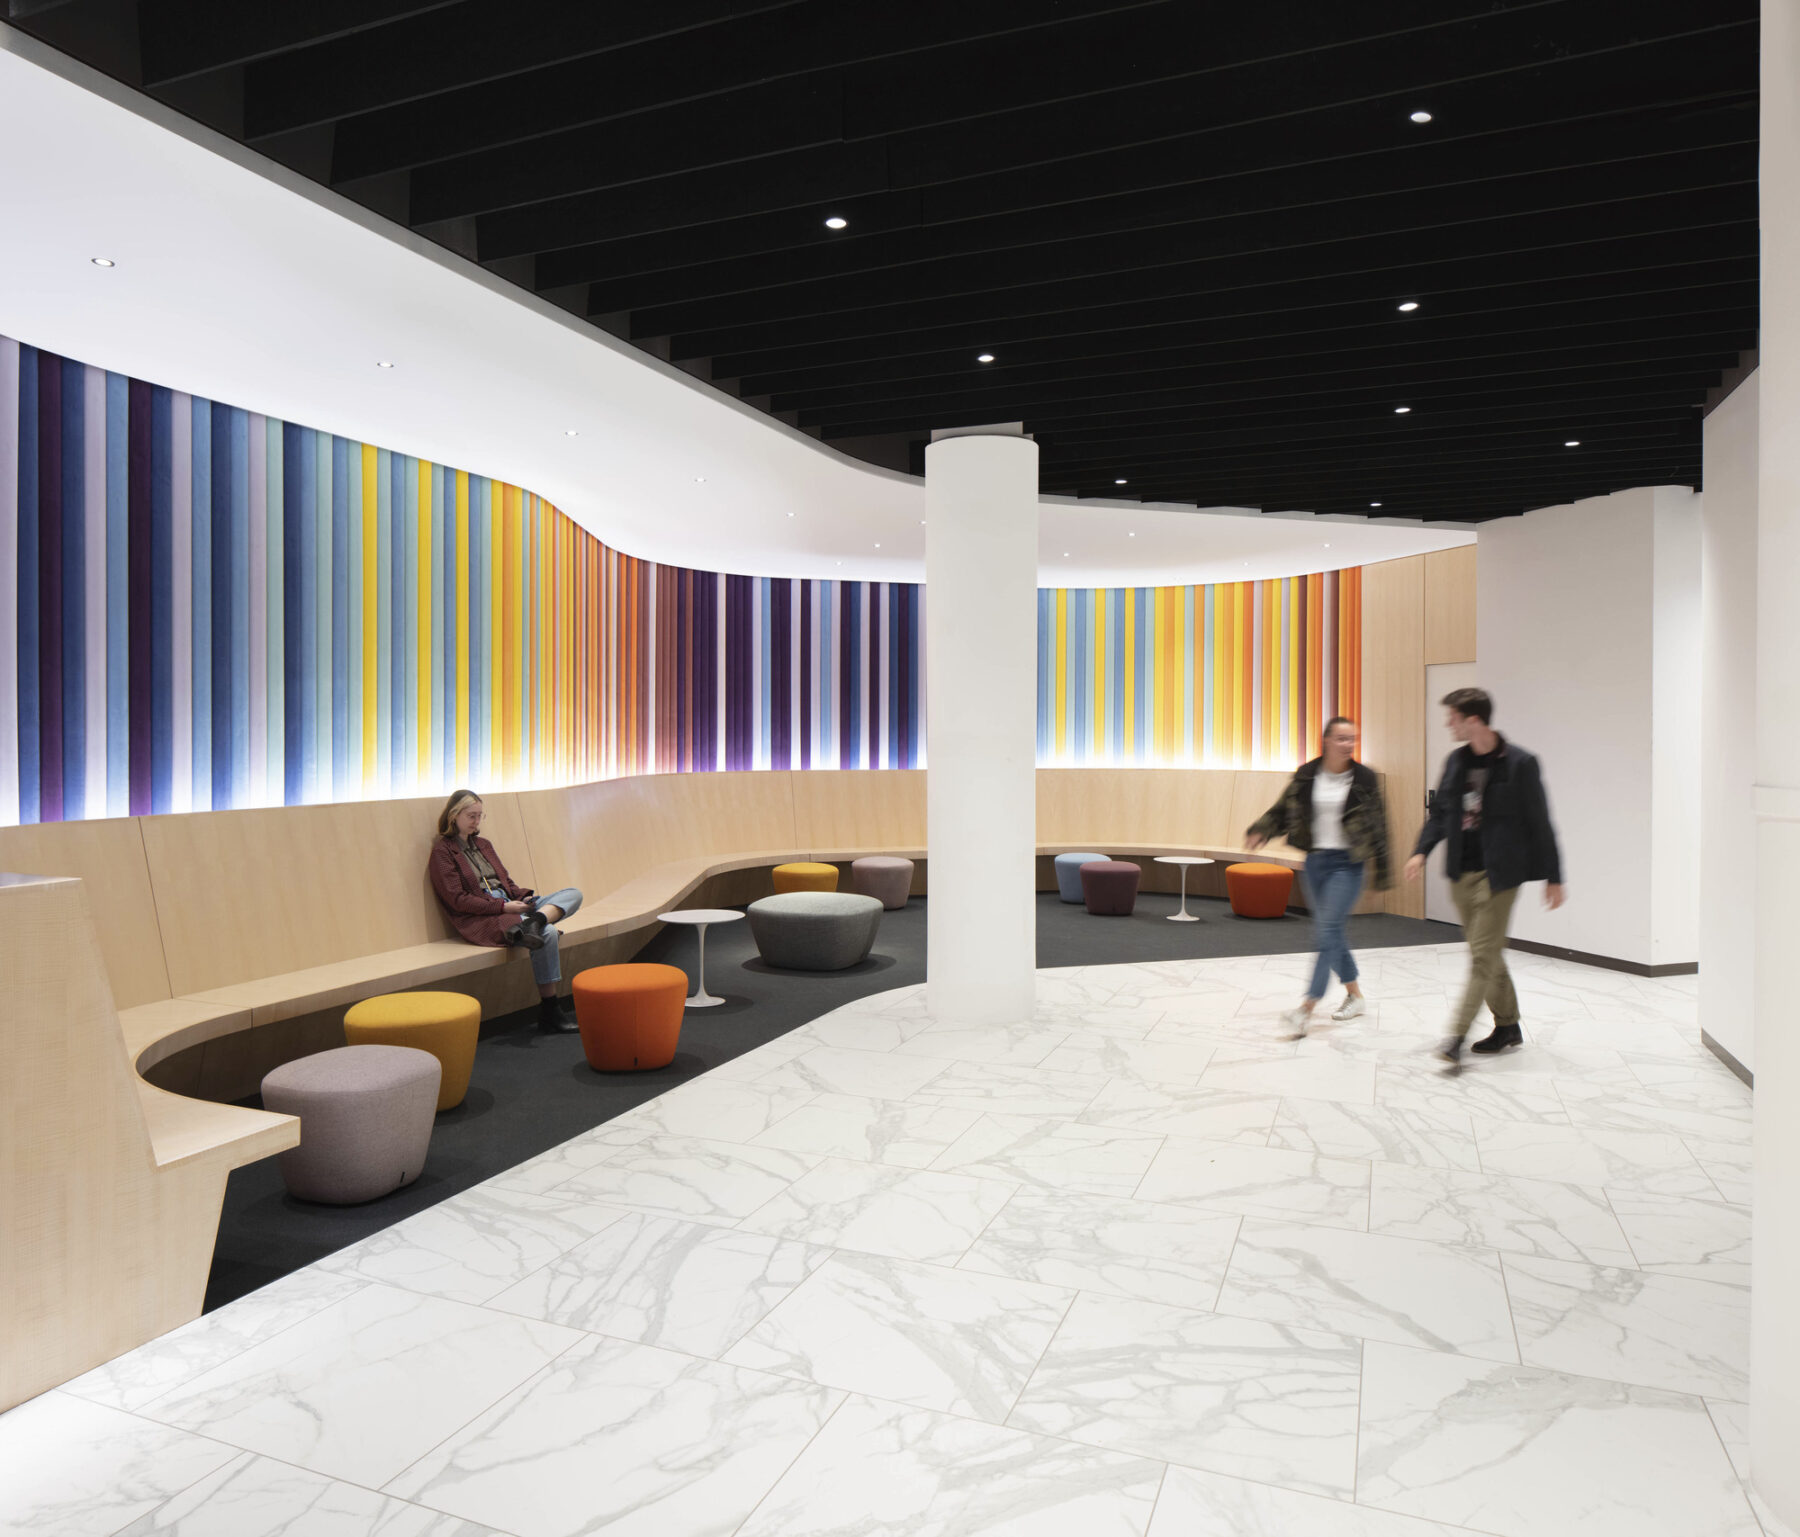 Lobby space with wrap around built-in bench and colorfully upholstered wall. Two people walk through the space chatting while one person sits on the bench looking at her phone.